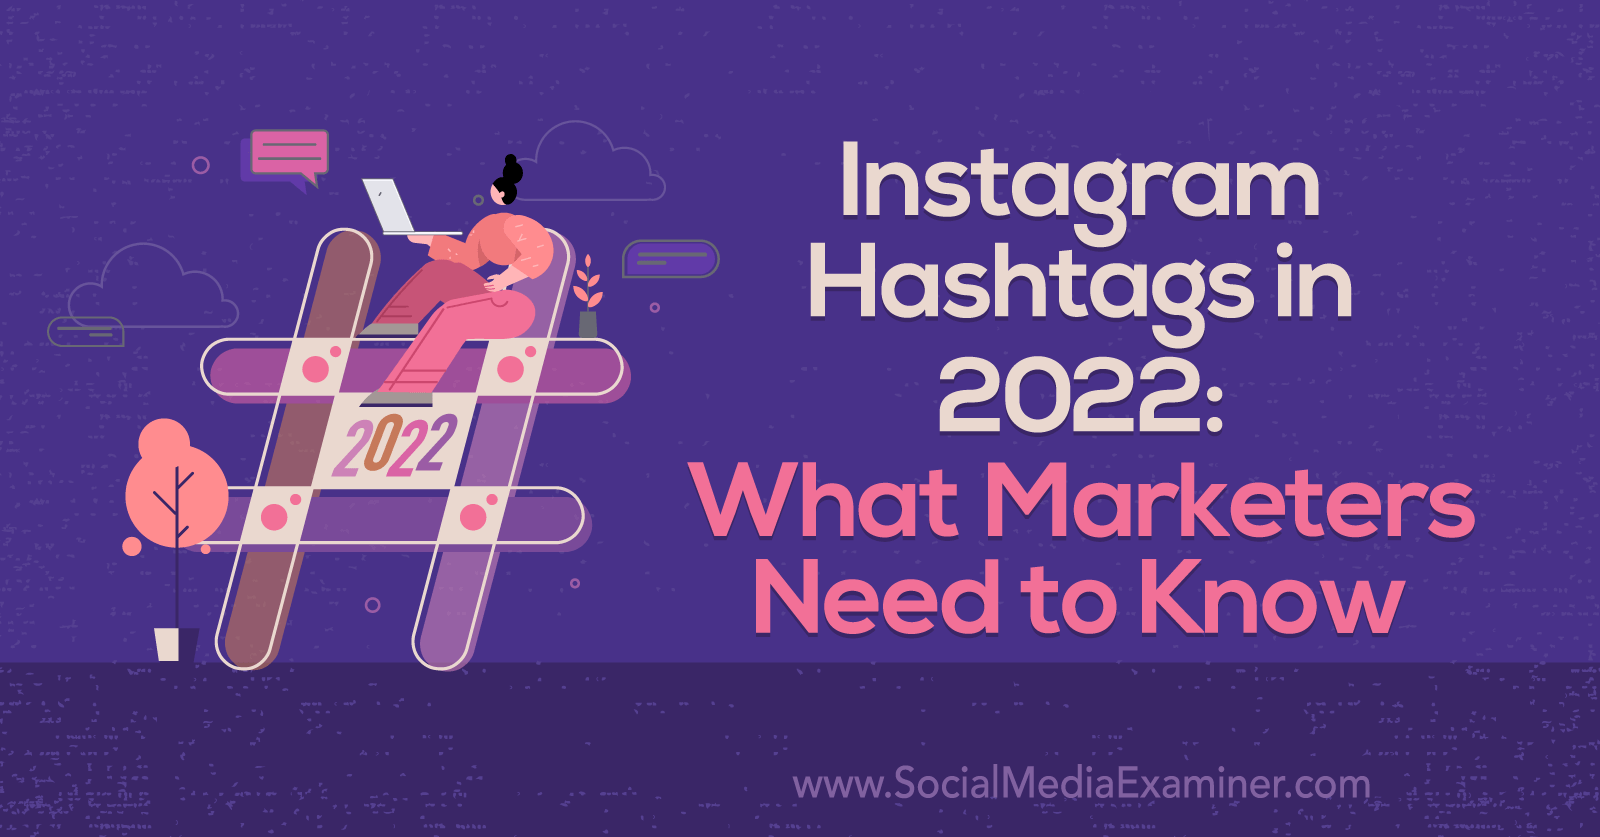 Instagram Hashtags in 2022 What Marketers Need to Know Social Media